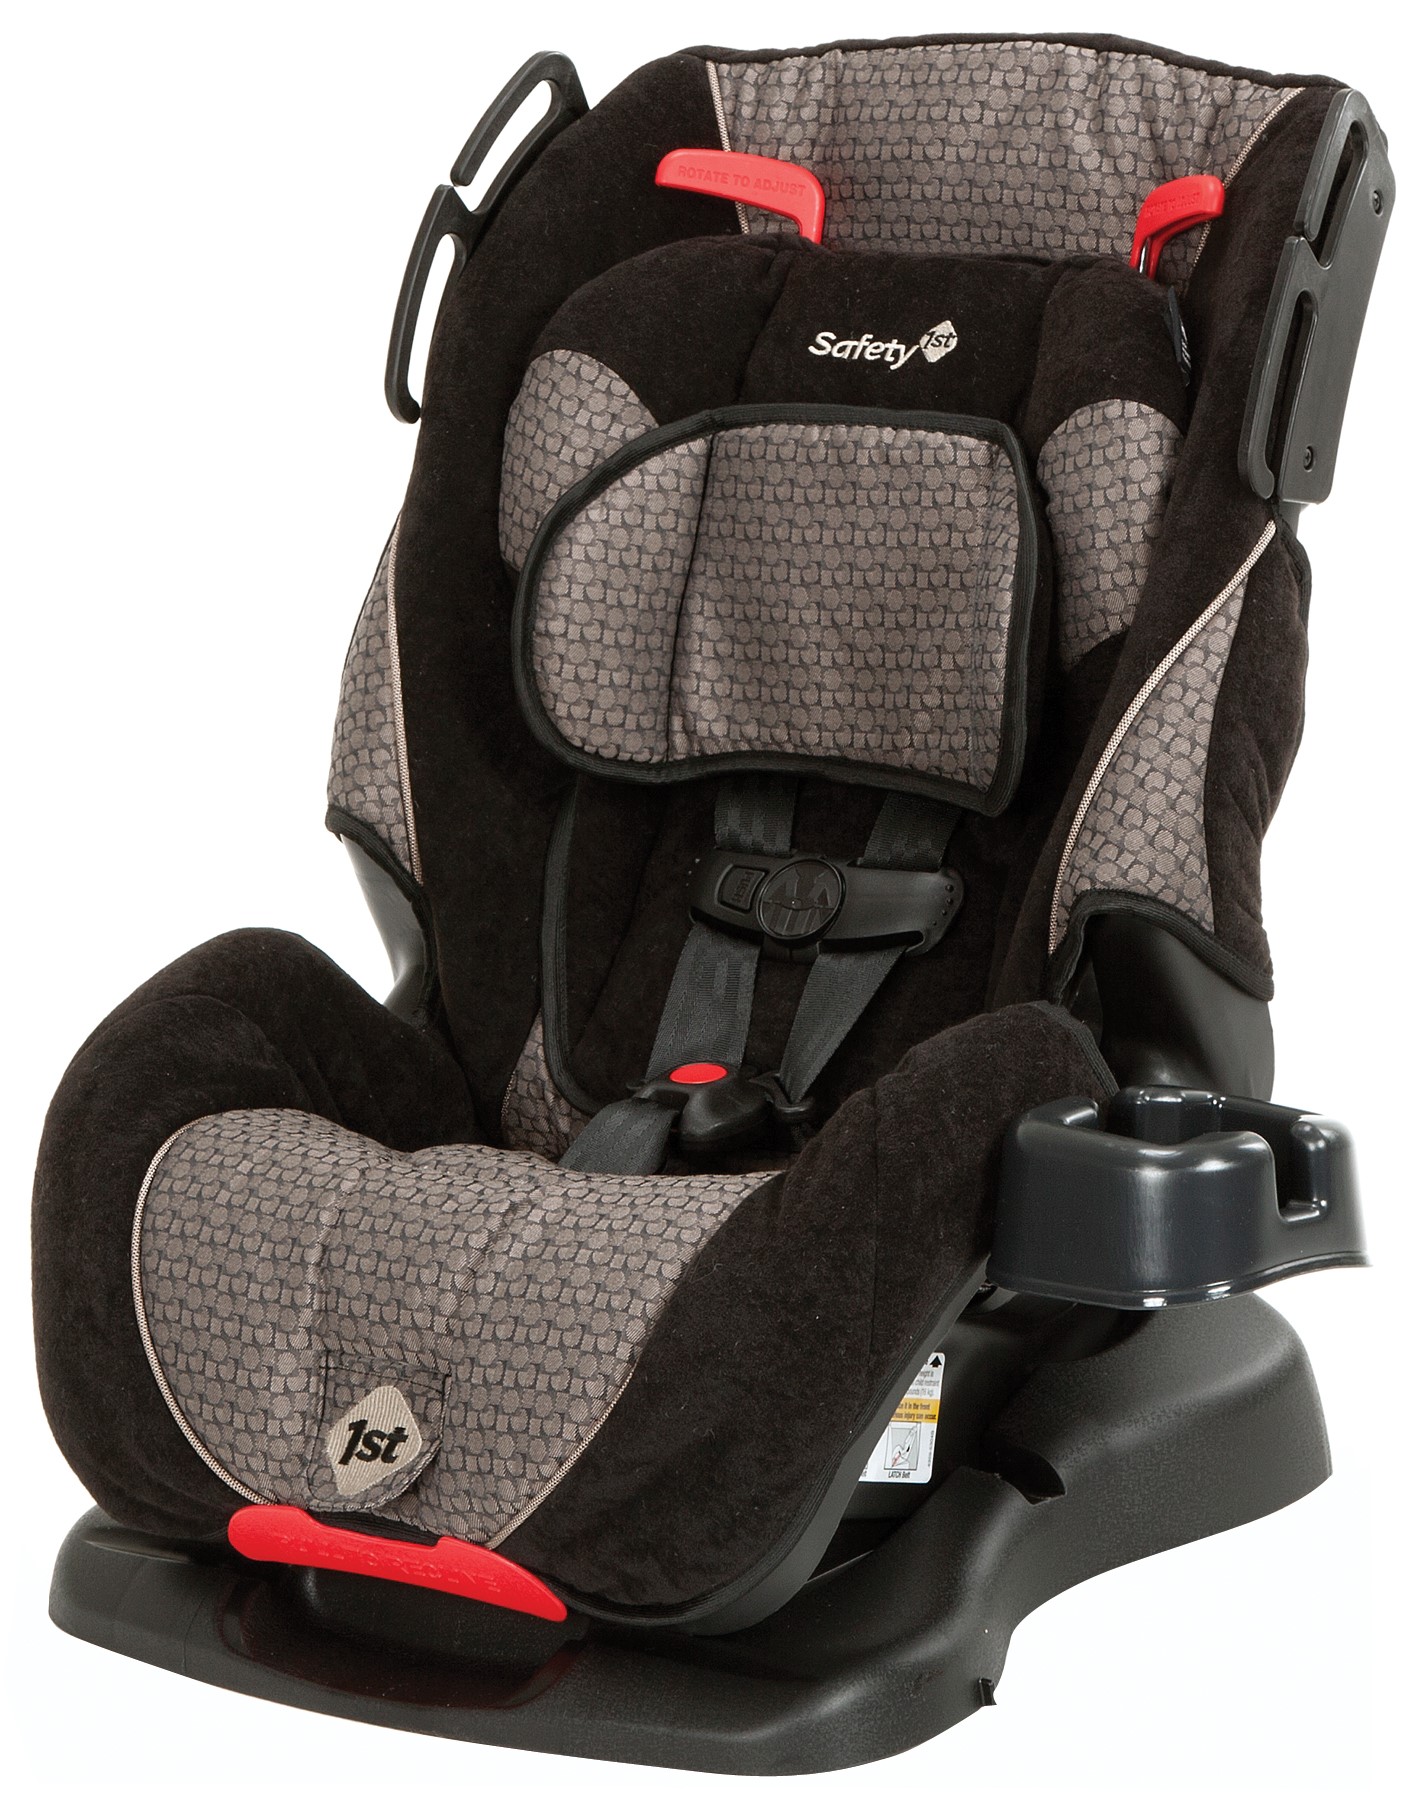 Safety 1st All-in-One Convertible Car Seat - Dorian - image 1 of 2